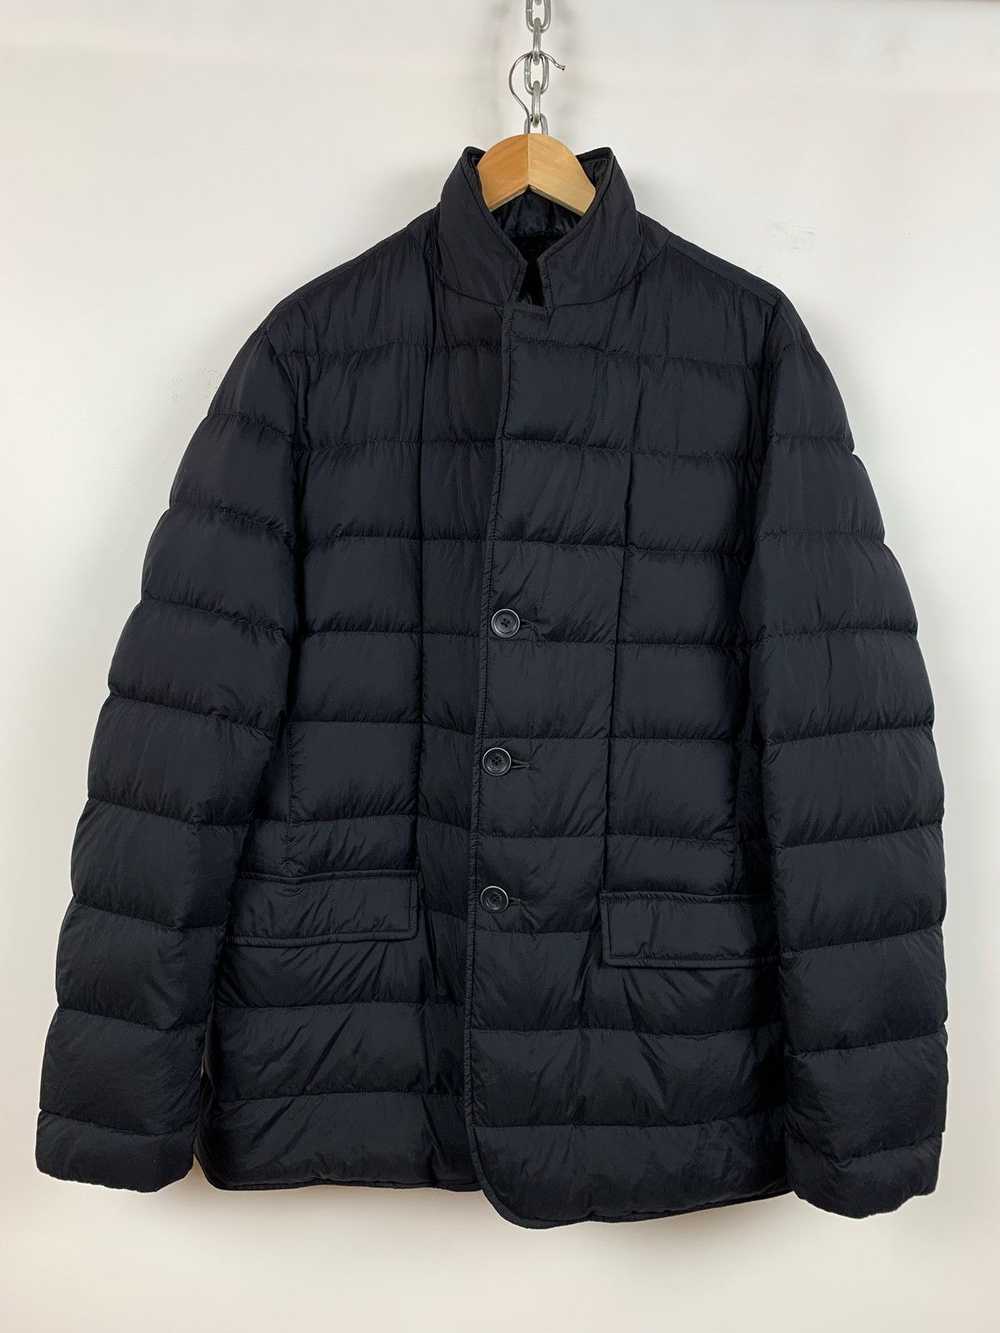 Herno Herno Navy Blue Quilted Down Jacket - image 2